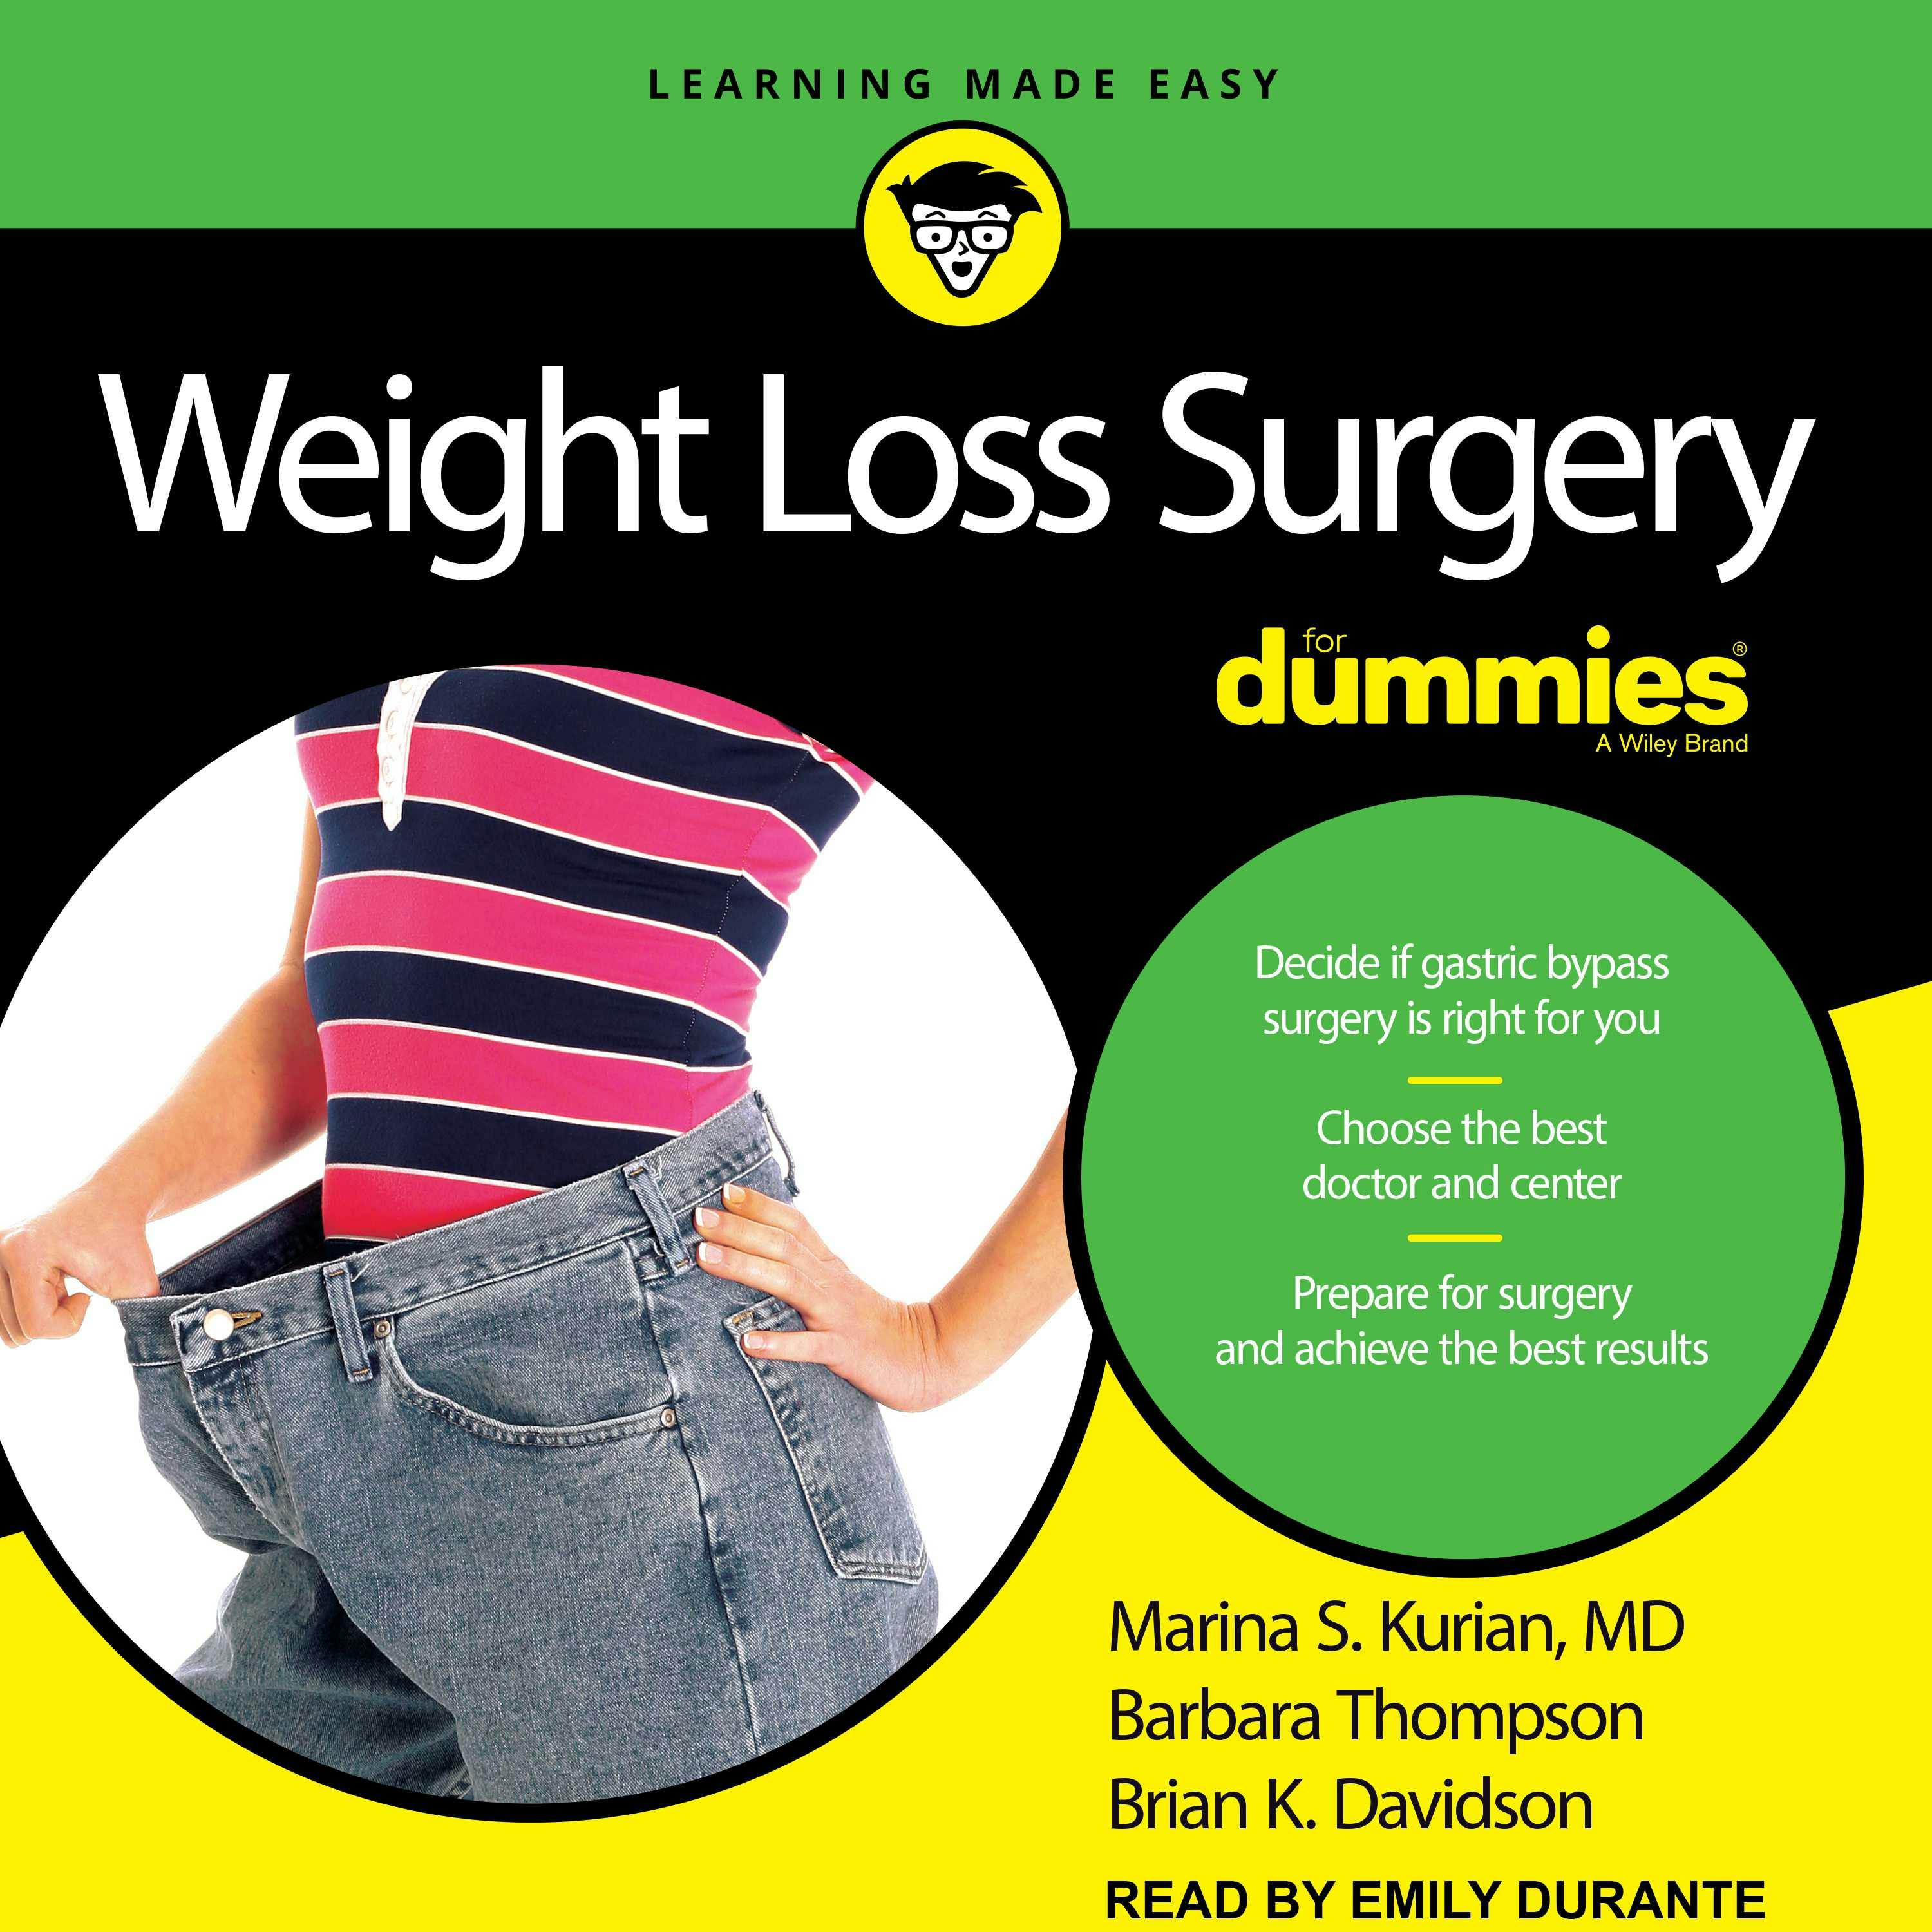 Weight Loss Surgery For Dummies: 2nd Edition - MD, Brian K. Davidson, Barbara Thompson